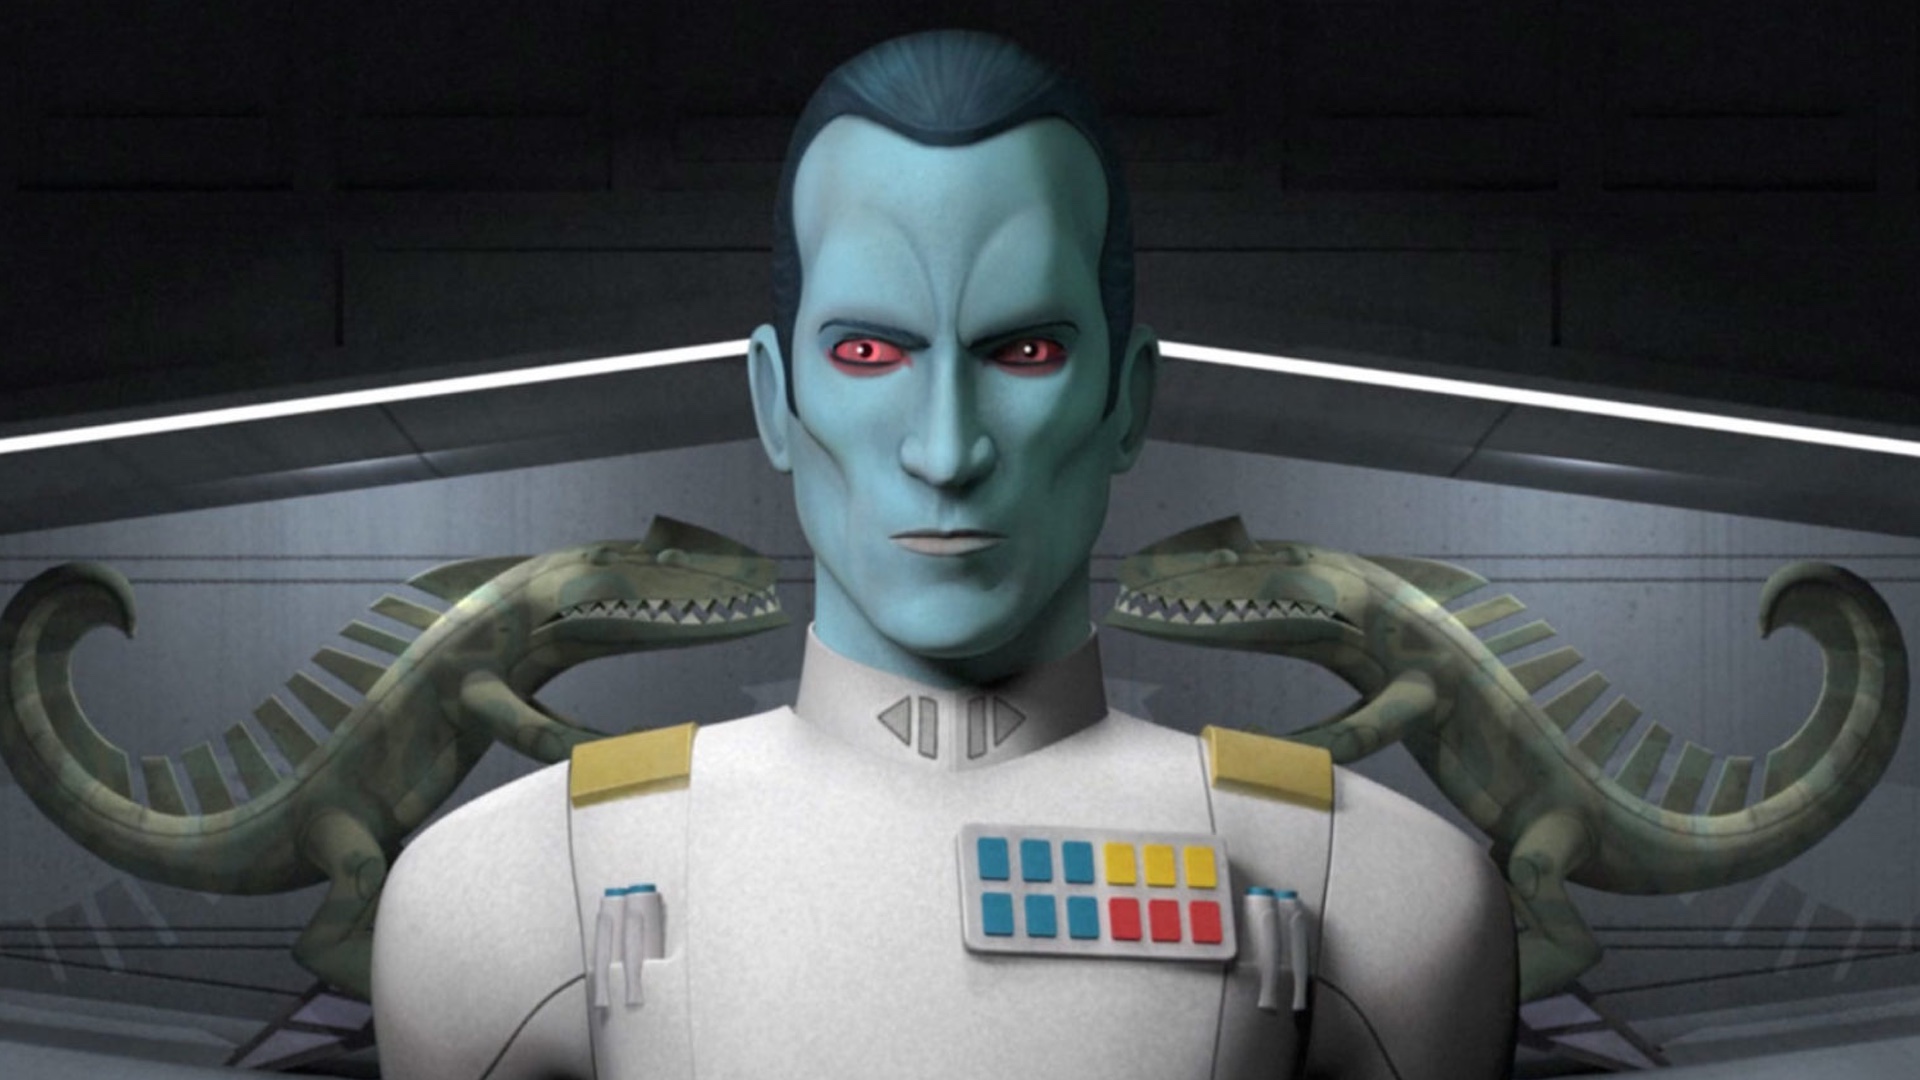 could-grand-admiral-thrawn-be-coming-to-a-new-star-wars-movie-watch-this-audition-video-social.jpg